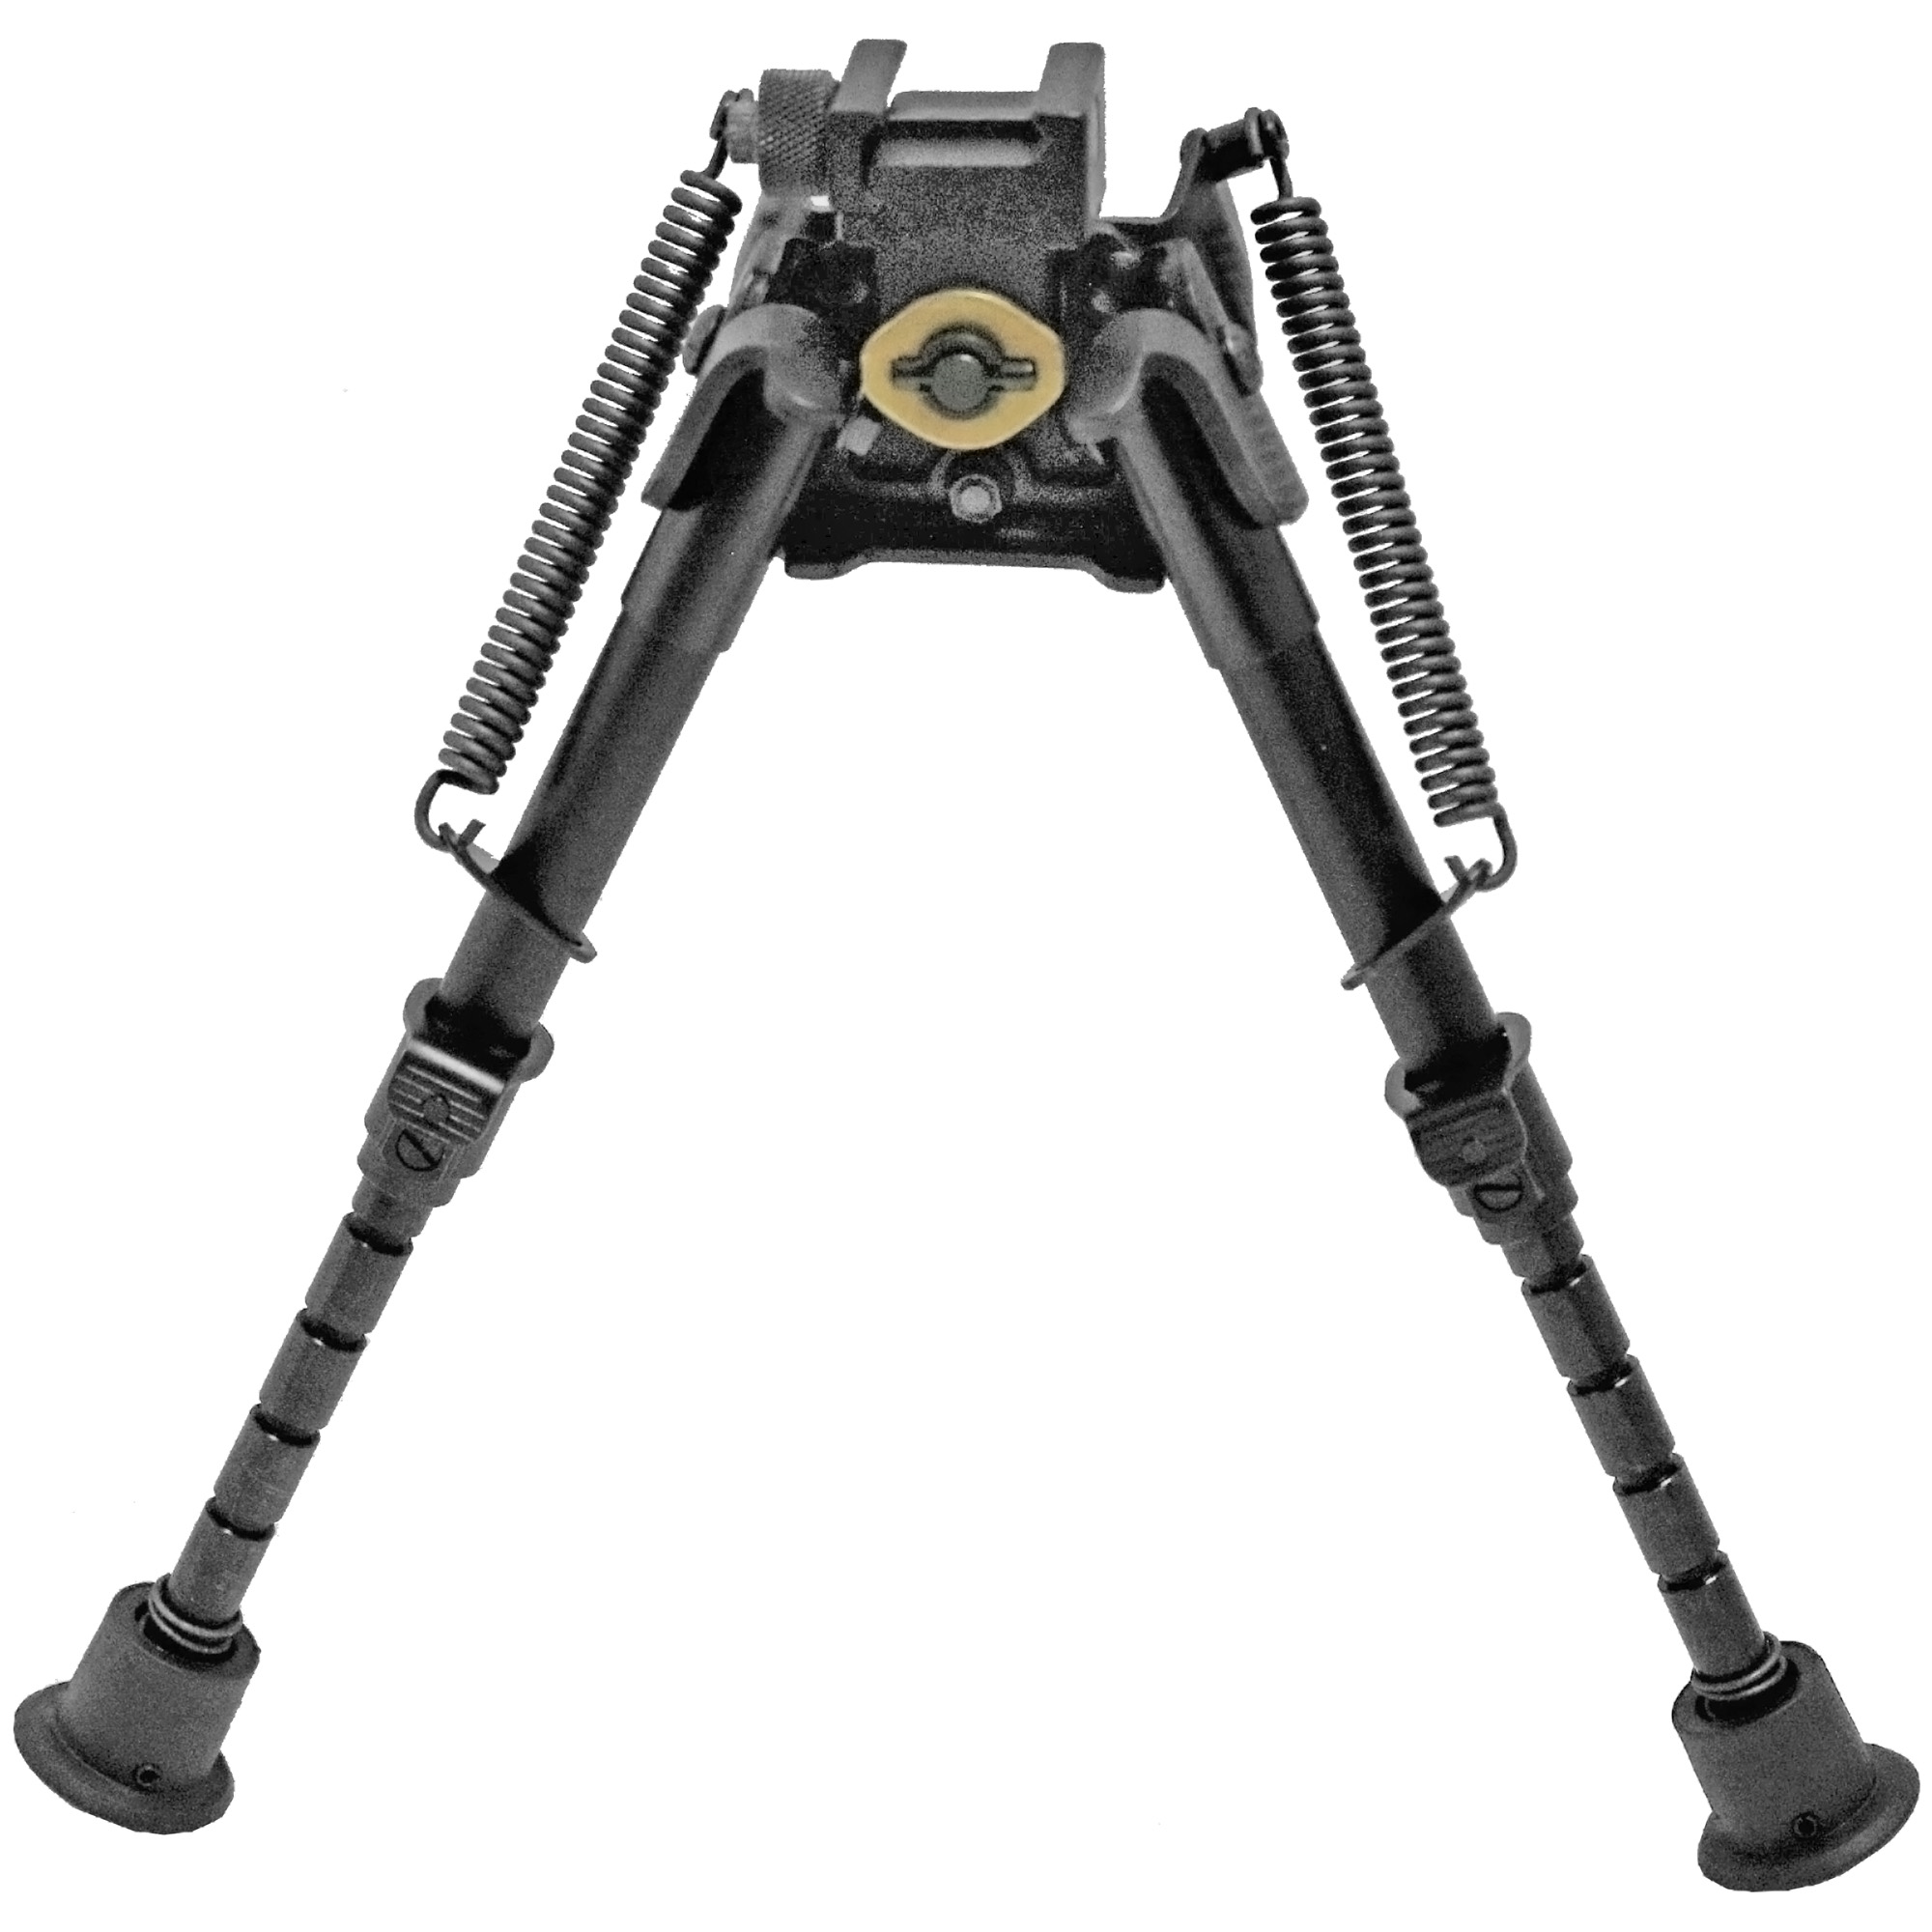 Harris Bipods S-BRMP, Bipod 6" to 9". Extendable Quick Deploy Spring Loaded Notched Legs, Picatinny Rail, Mountable Swivel, Anod